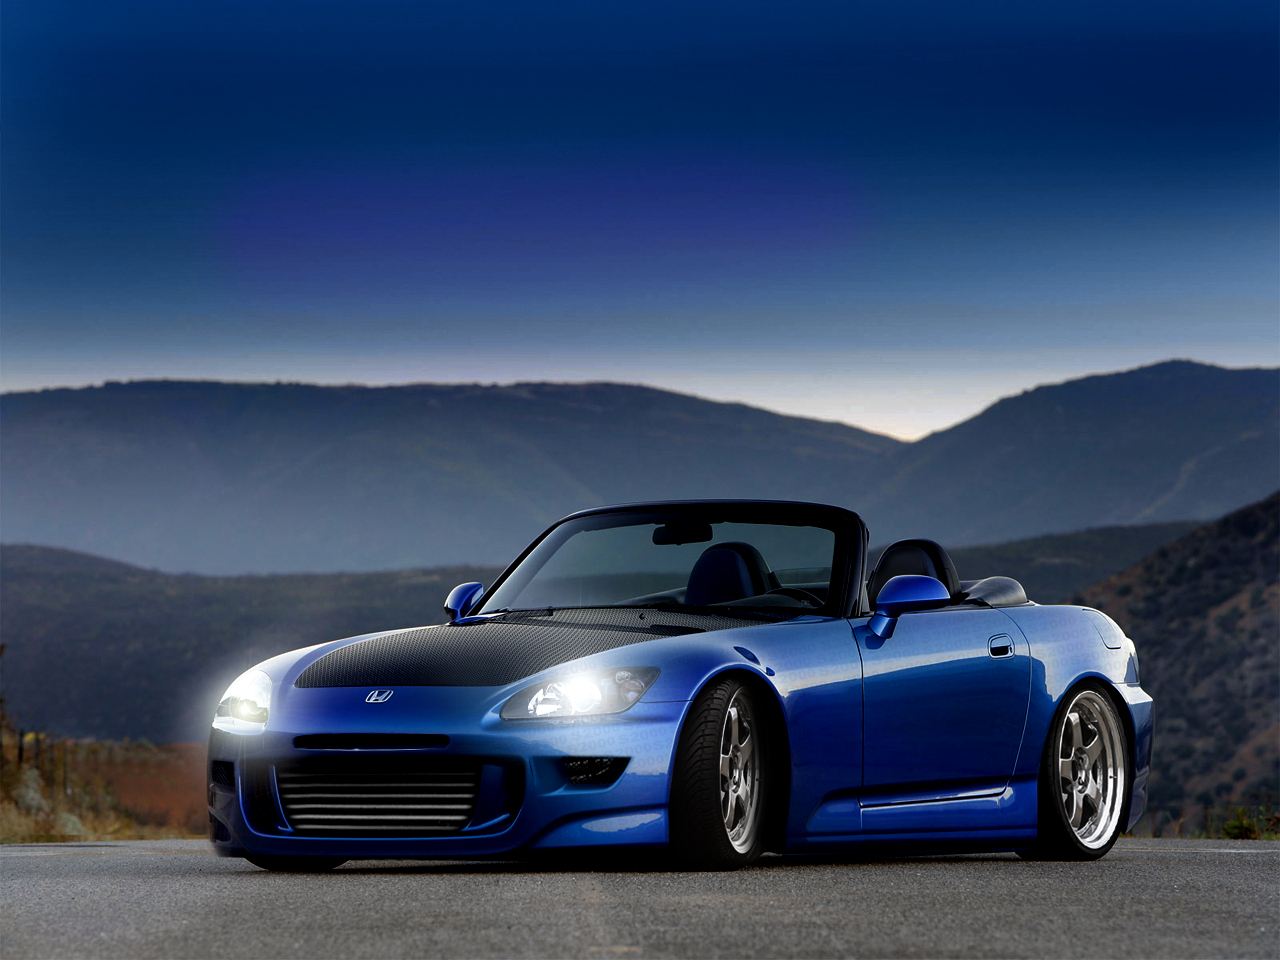 Honda S2000 Wallpaper Pictures Photos And